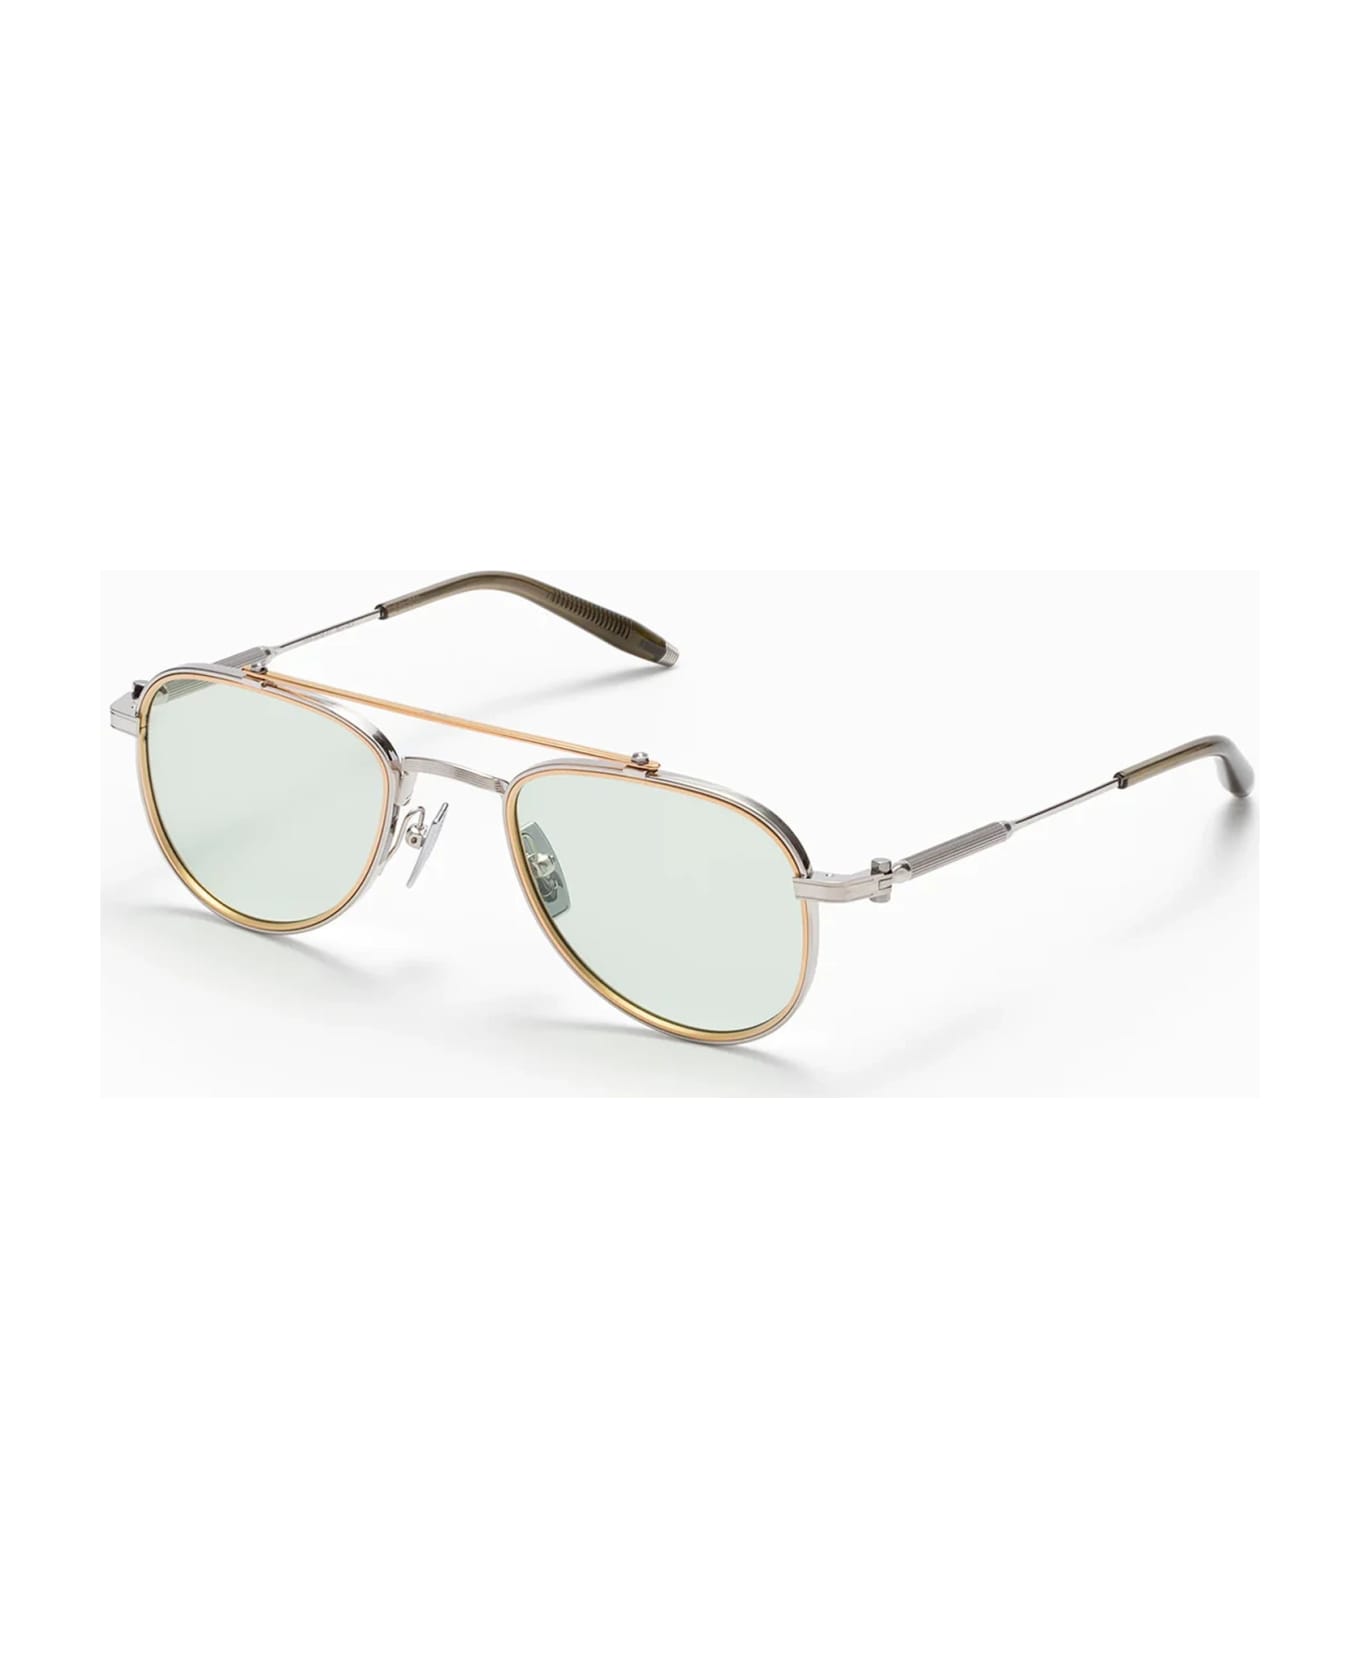 Akoni Calisto - Brushed Silver/matte Gold Brow Bar/olive Glasses - silver/gold アイウェア